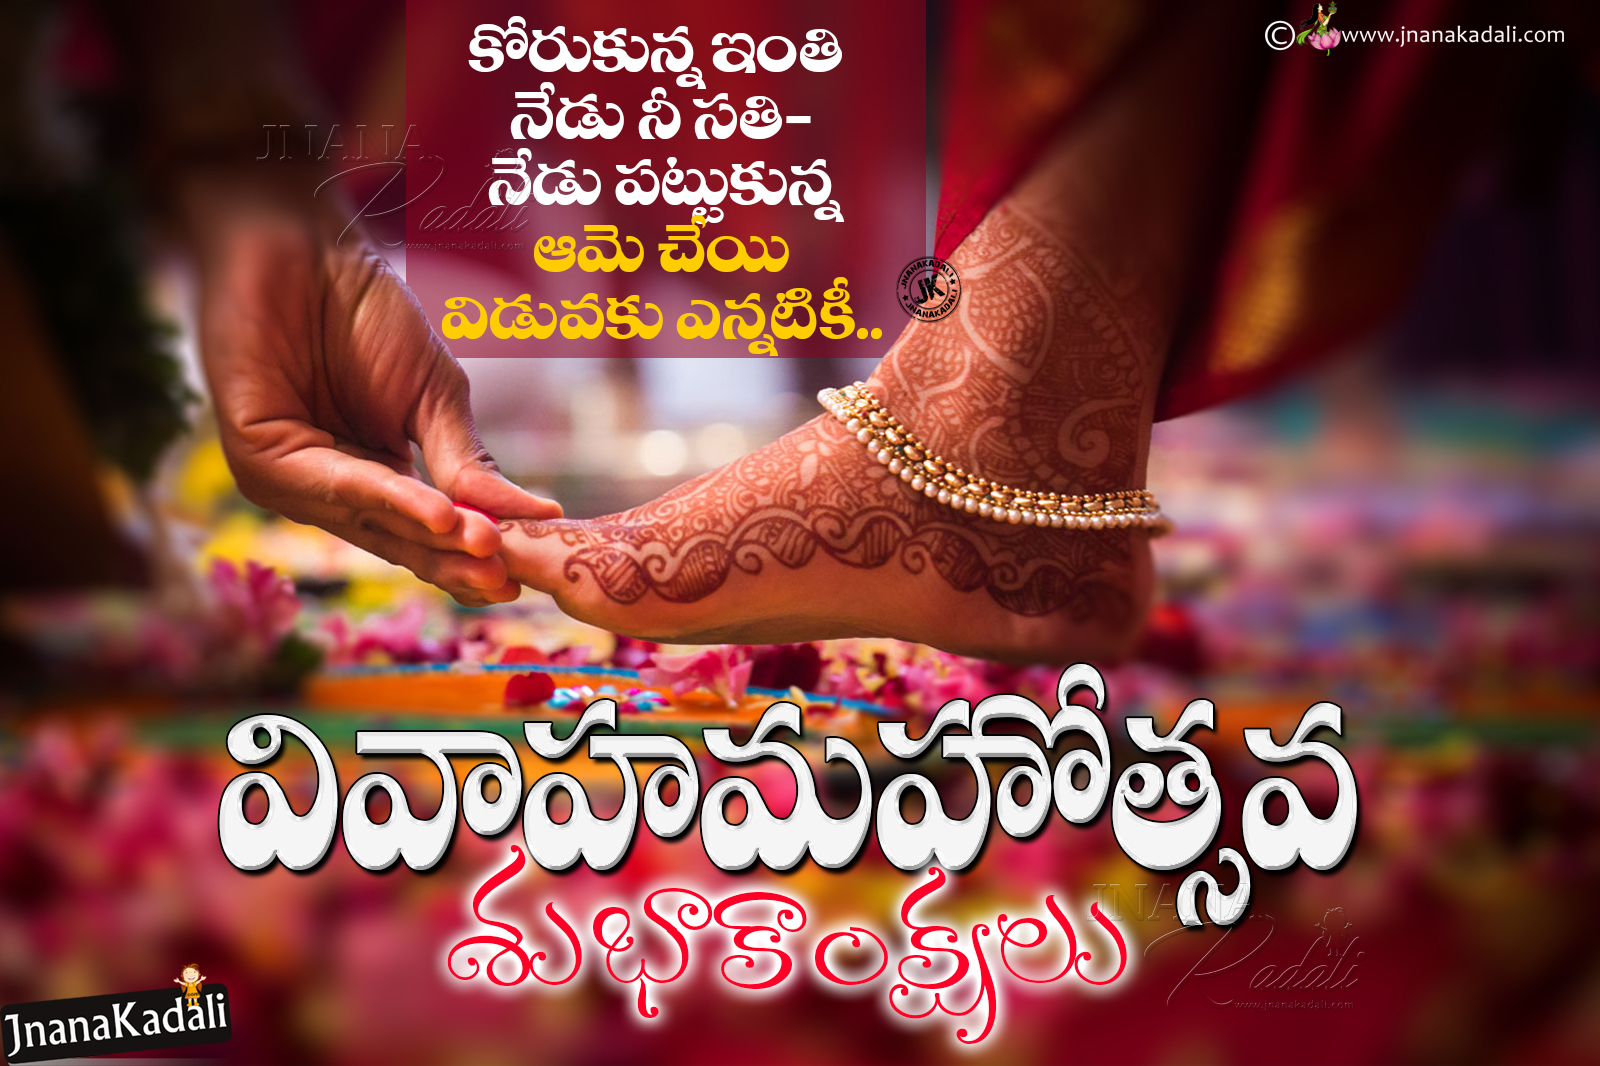 Happy Wedding Anniversary quotes wishes greetings Pelli ...